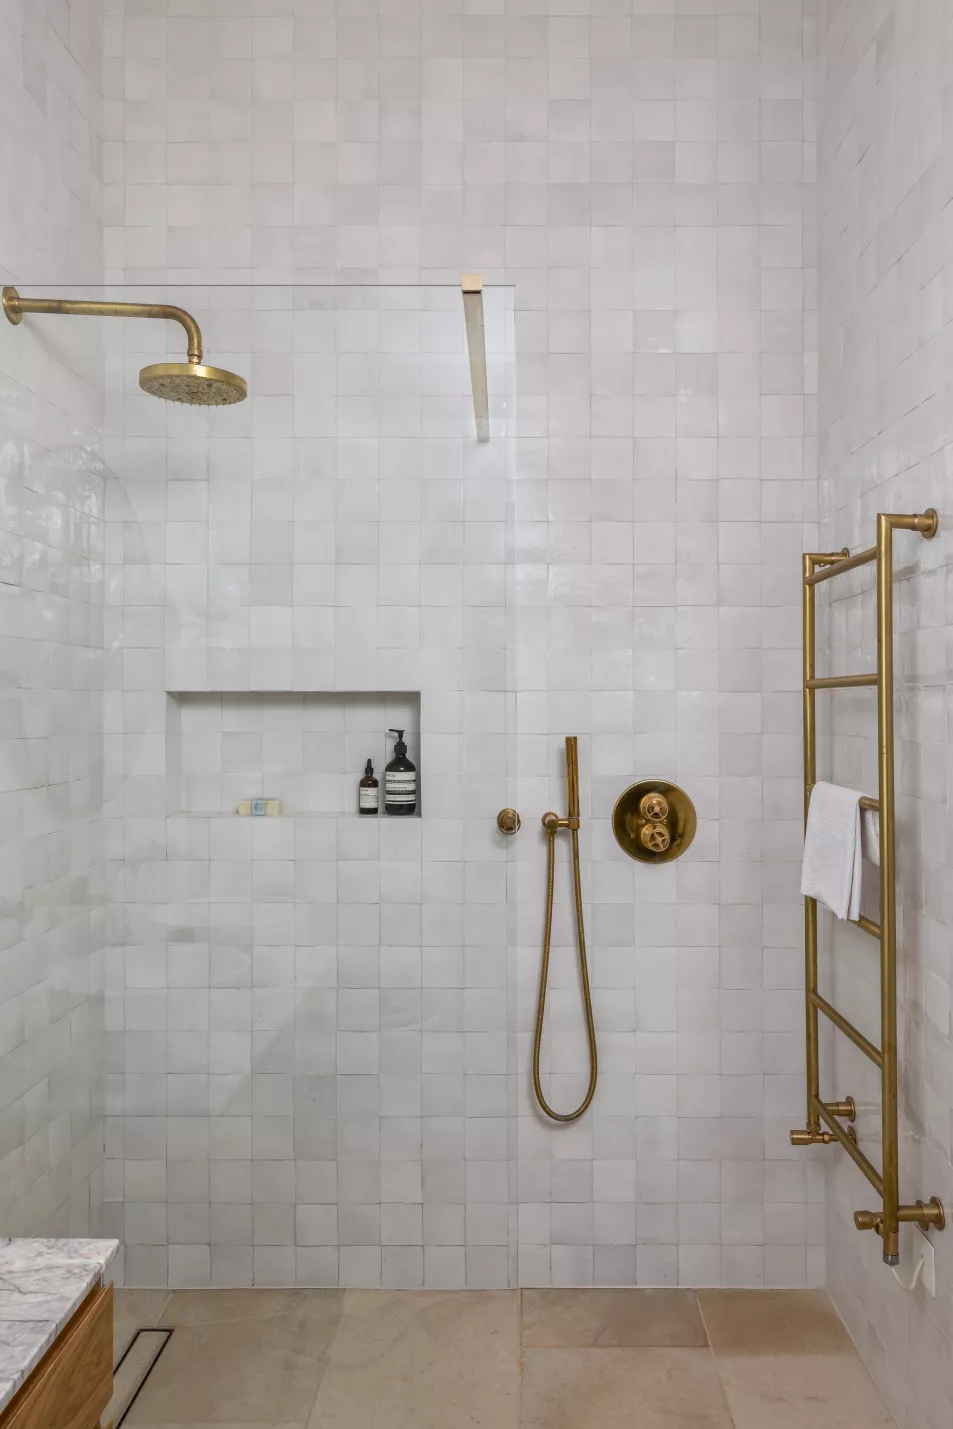 Walk-in shower to illustrate standout showers trend